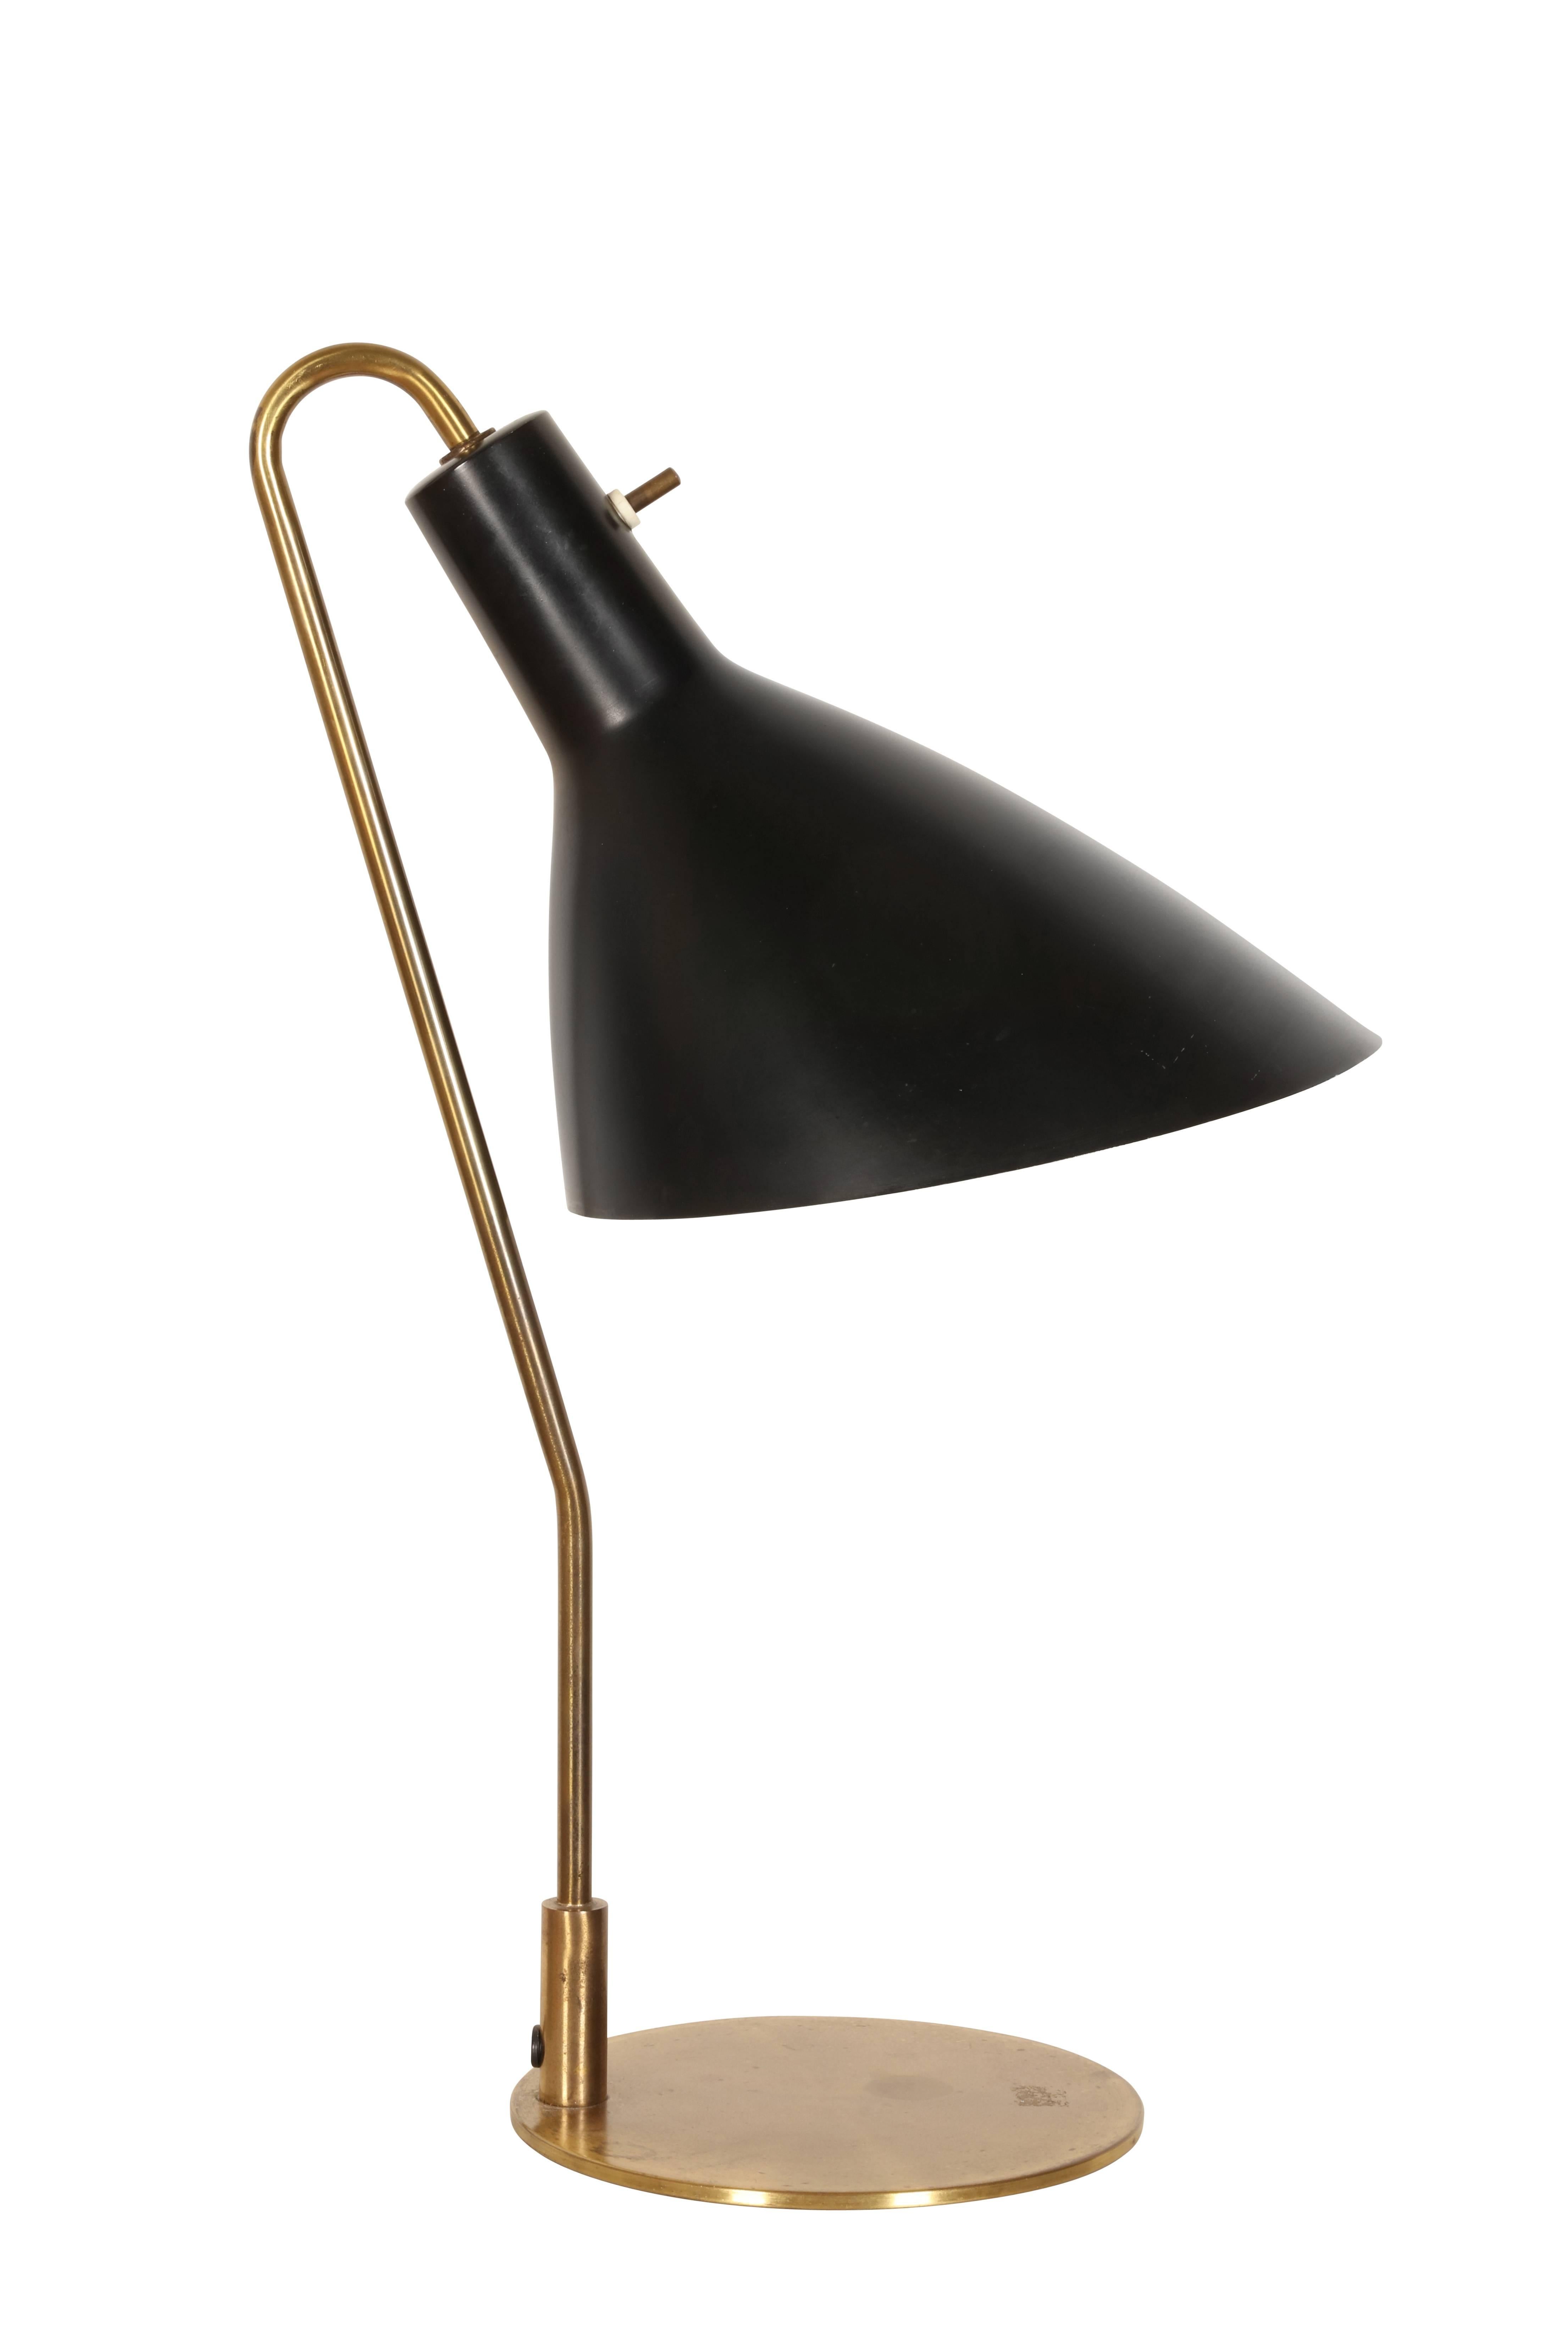 A rare table lamp in brass and original black painted metal shade.